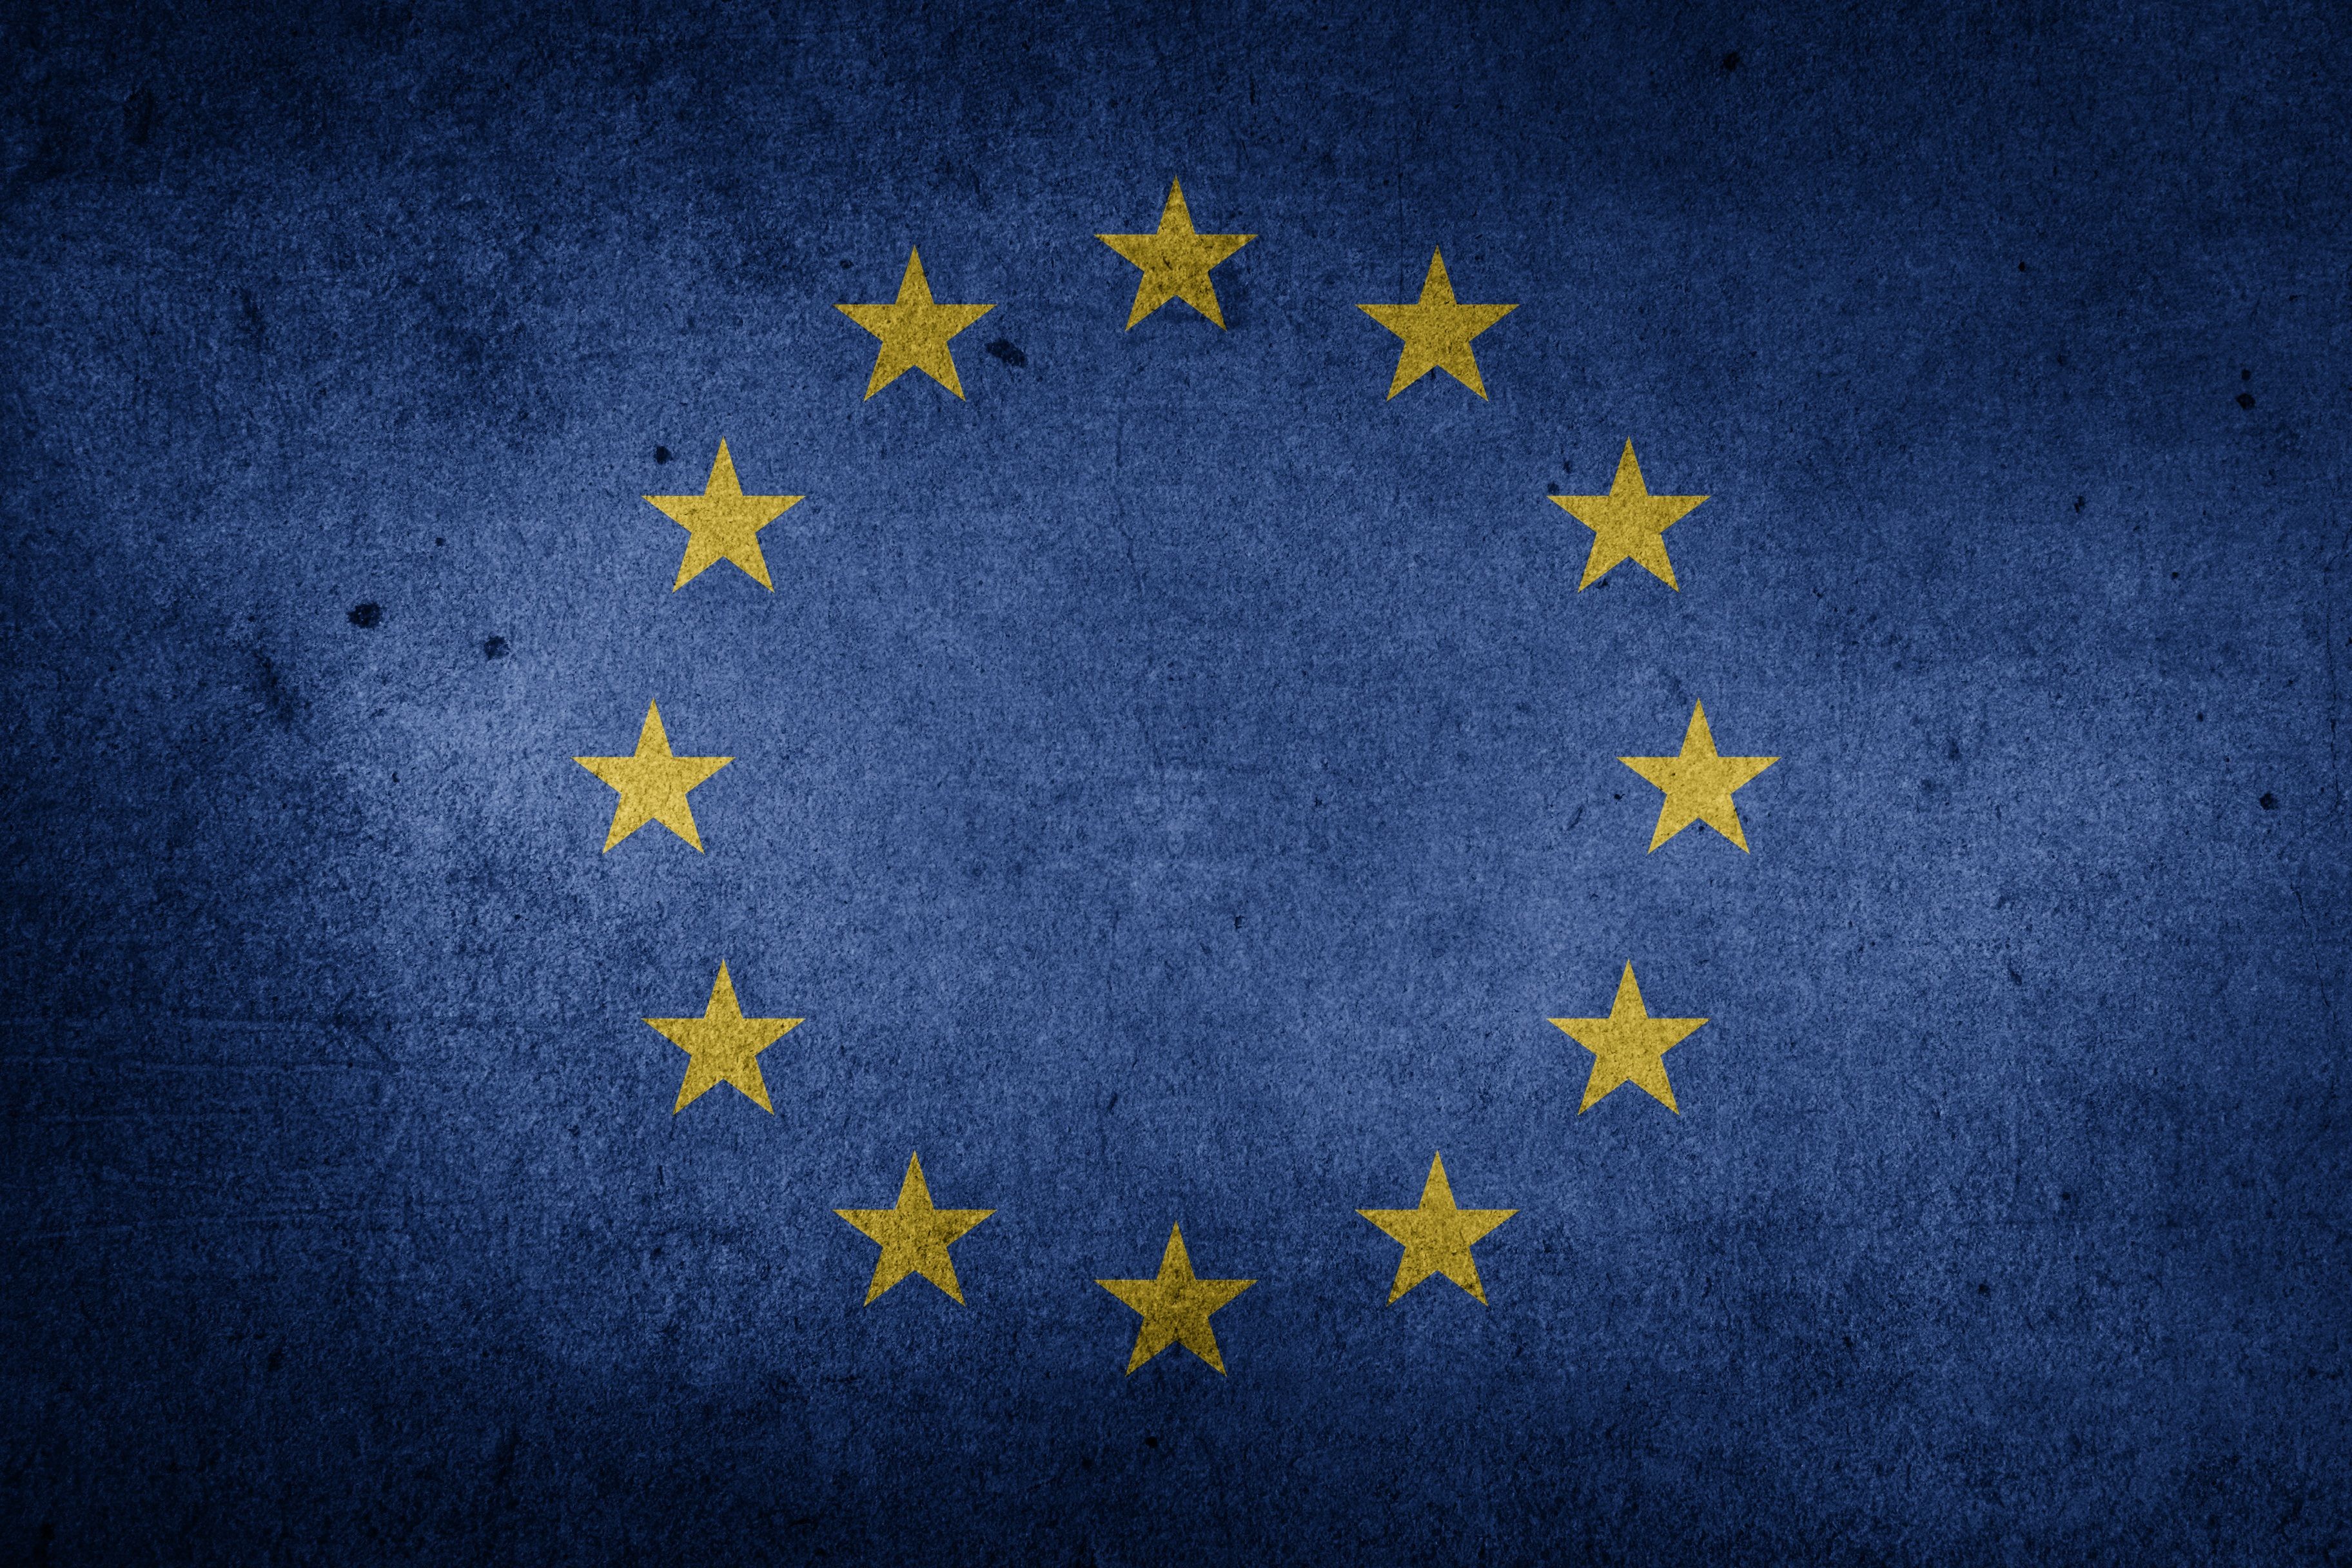 The Flag of the European Union (Grunge) HD Wallpaper